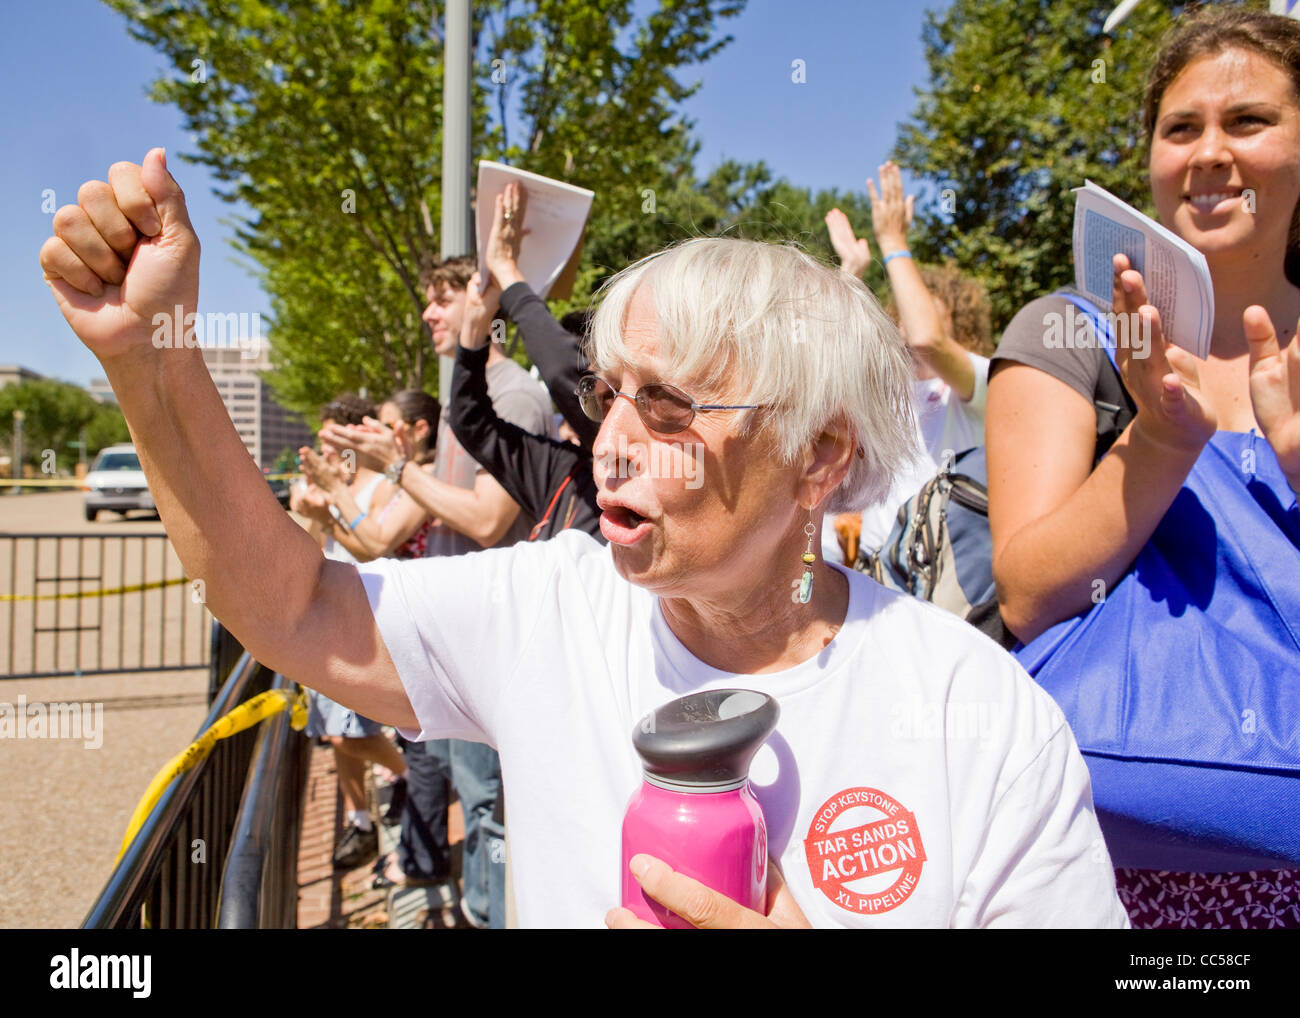 An elderly woman raises her fist during a demonstration Stock Photo